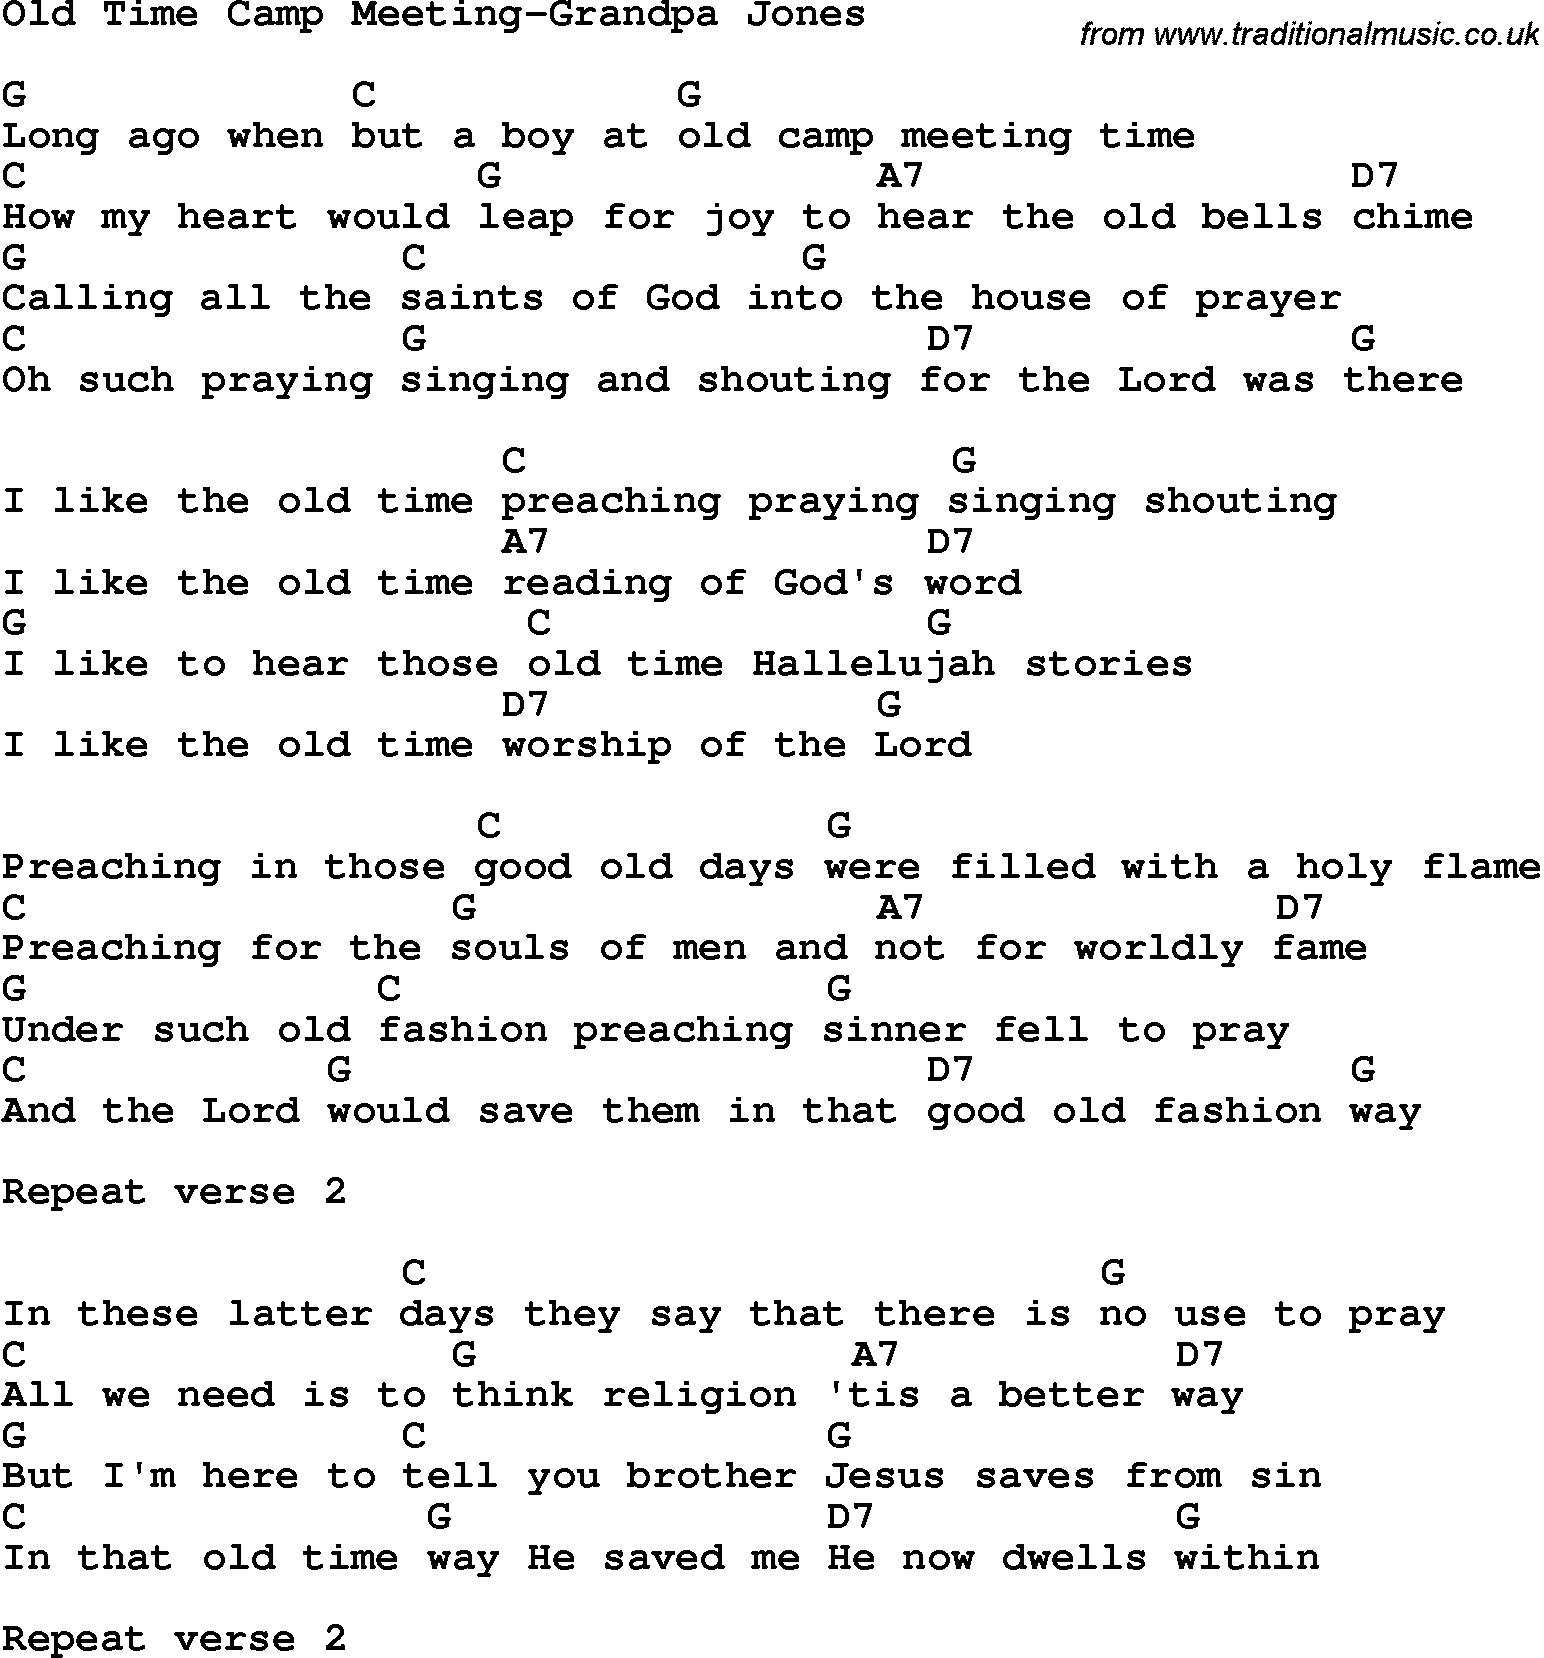 Country, Southern and Bluegrass Gospel Song Old Time Camp Meeting-Grandpa Jones lyrics and chords